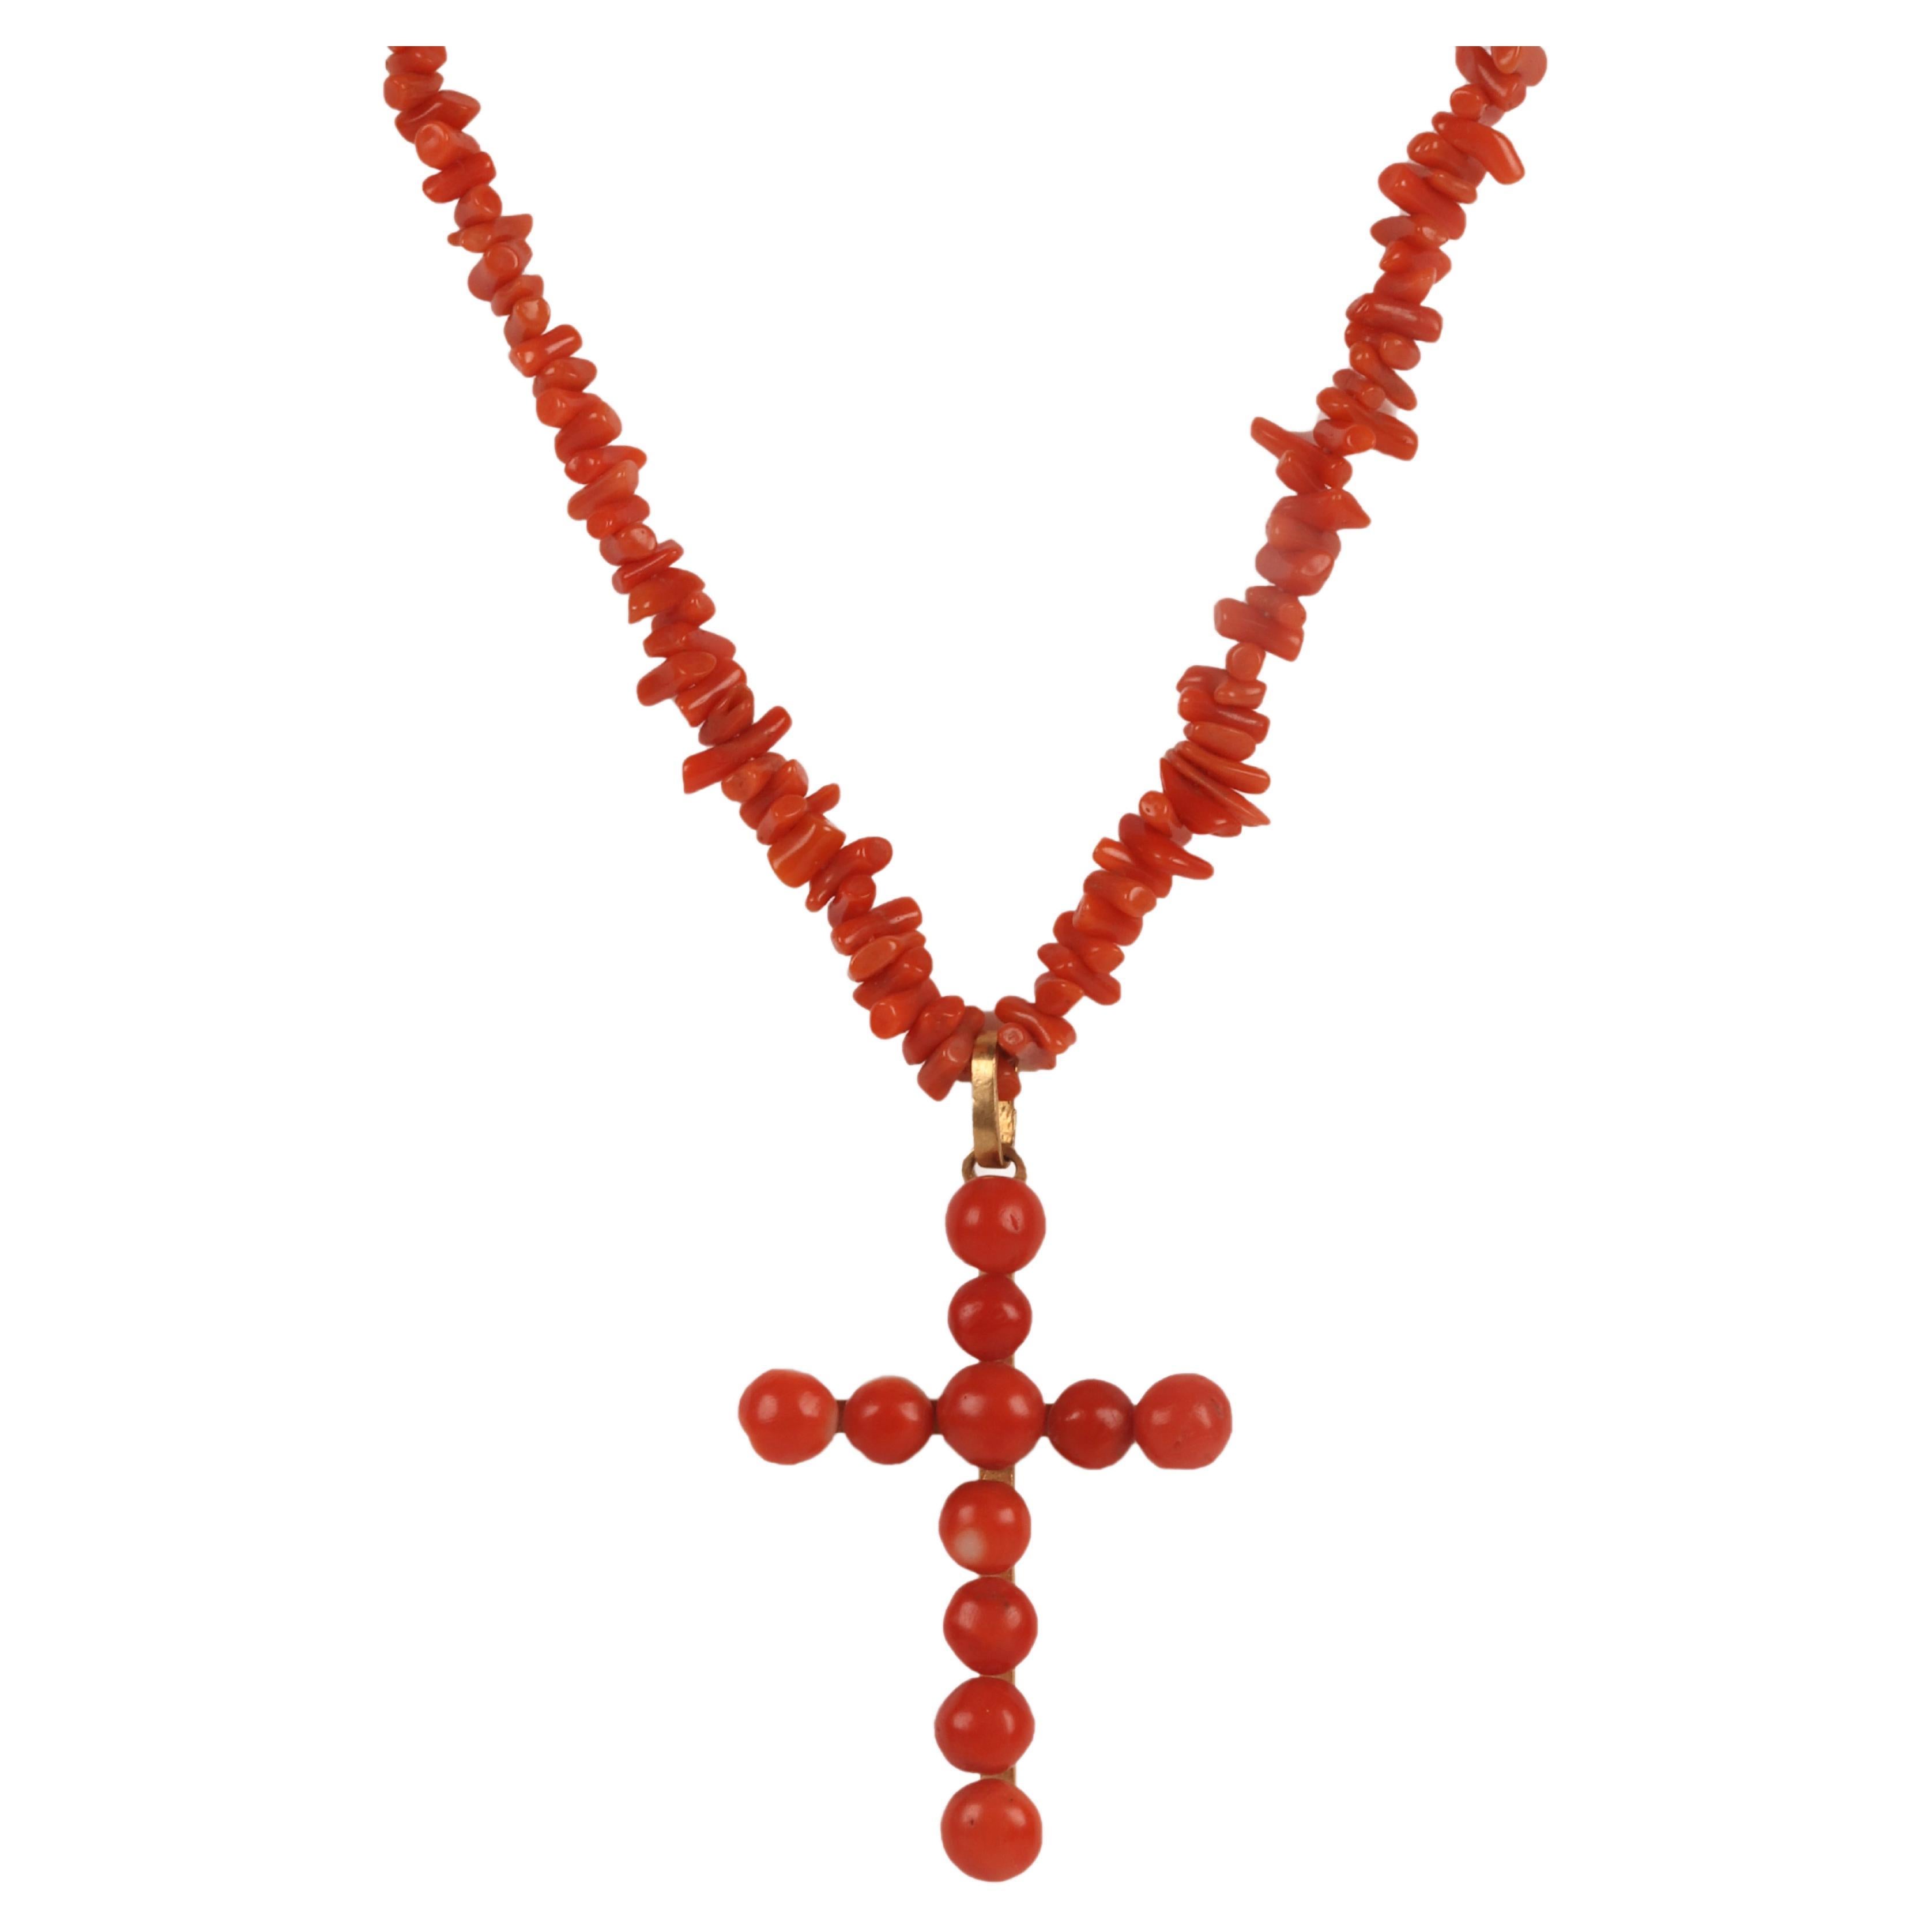 Cross necklace. Mediterranean coral from Sciacca, England 1880. For Sale